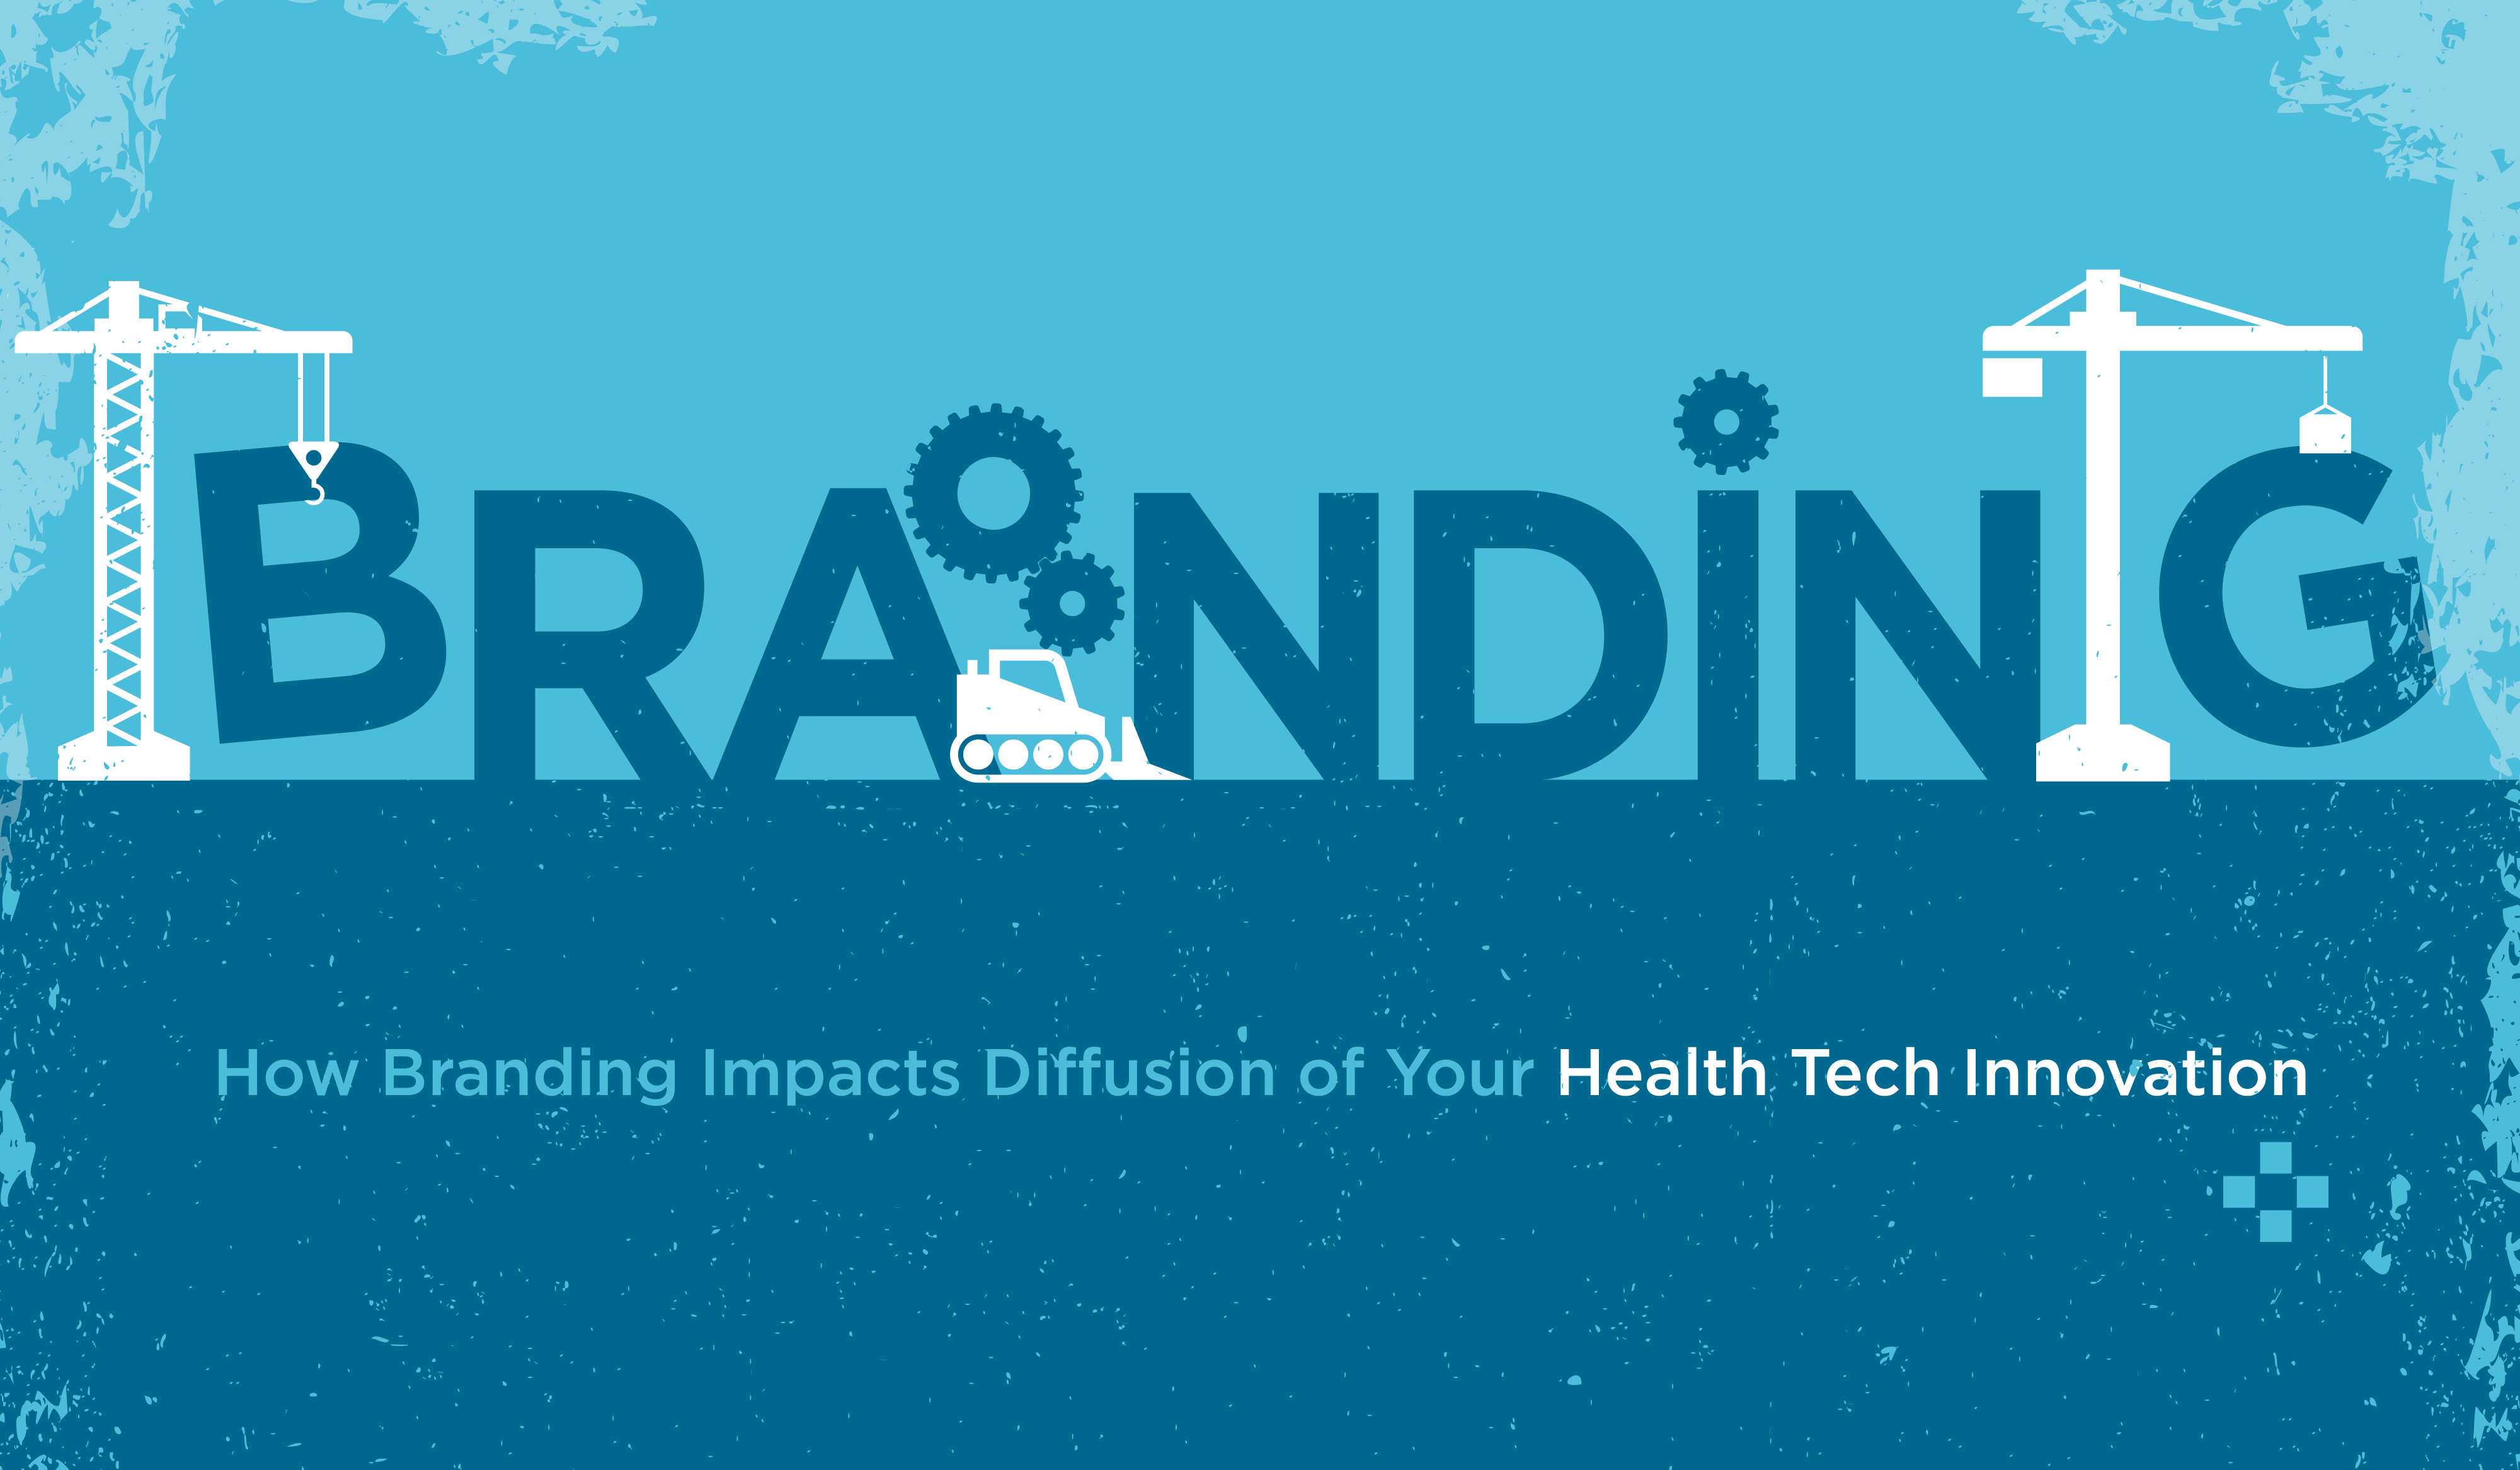 How Branding Impacts Diffusion of Your Health Tech Innovation?